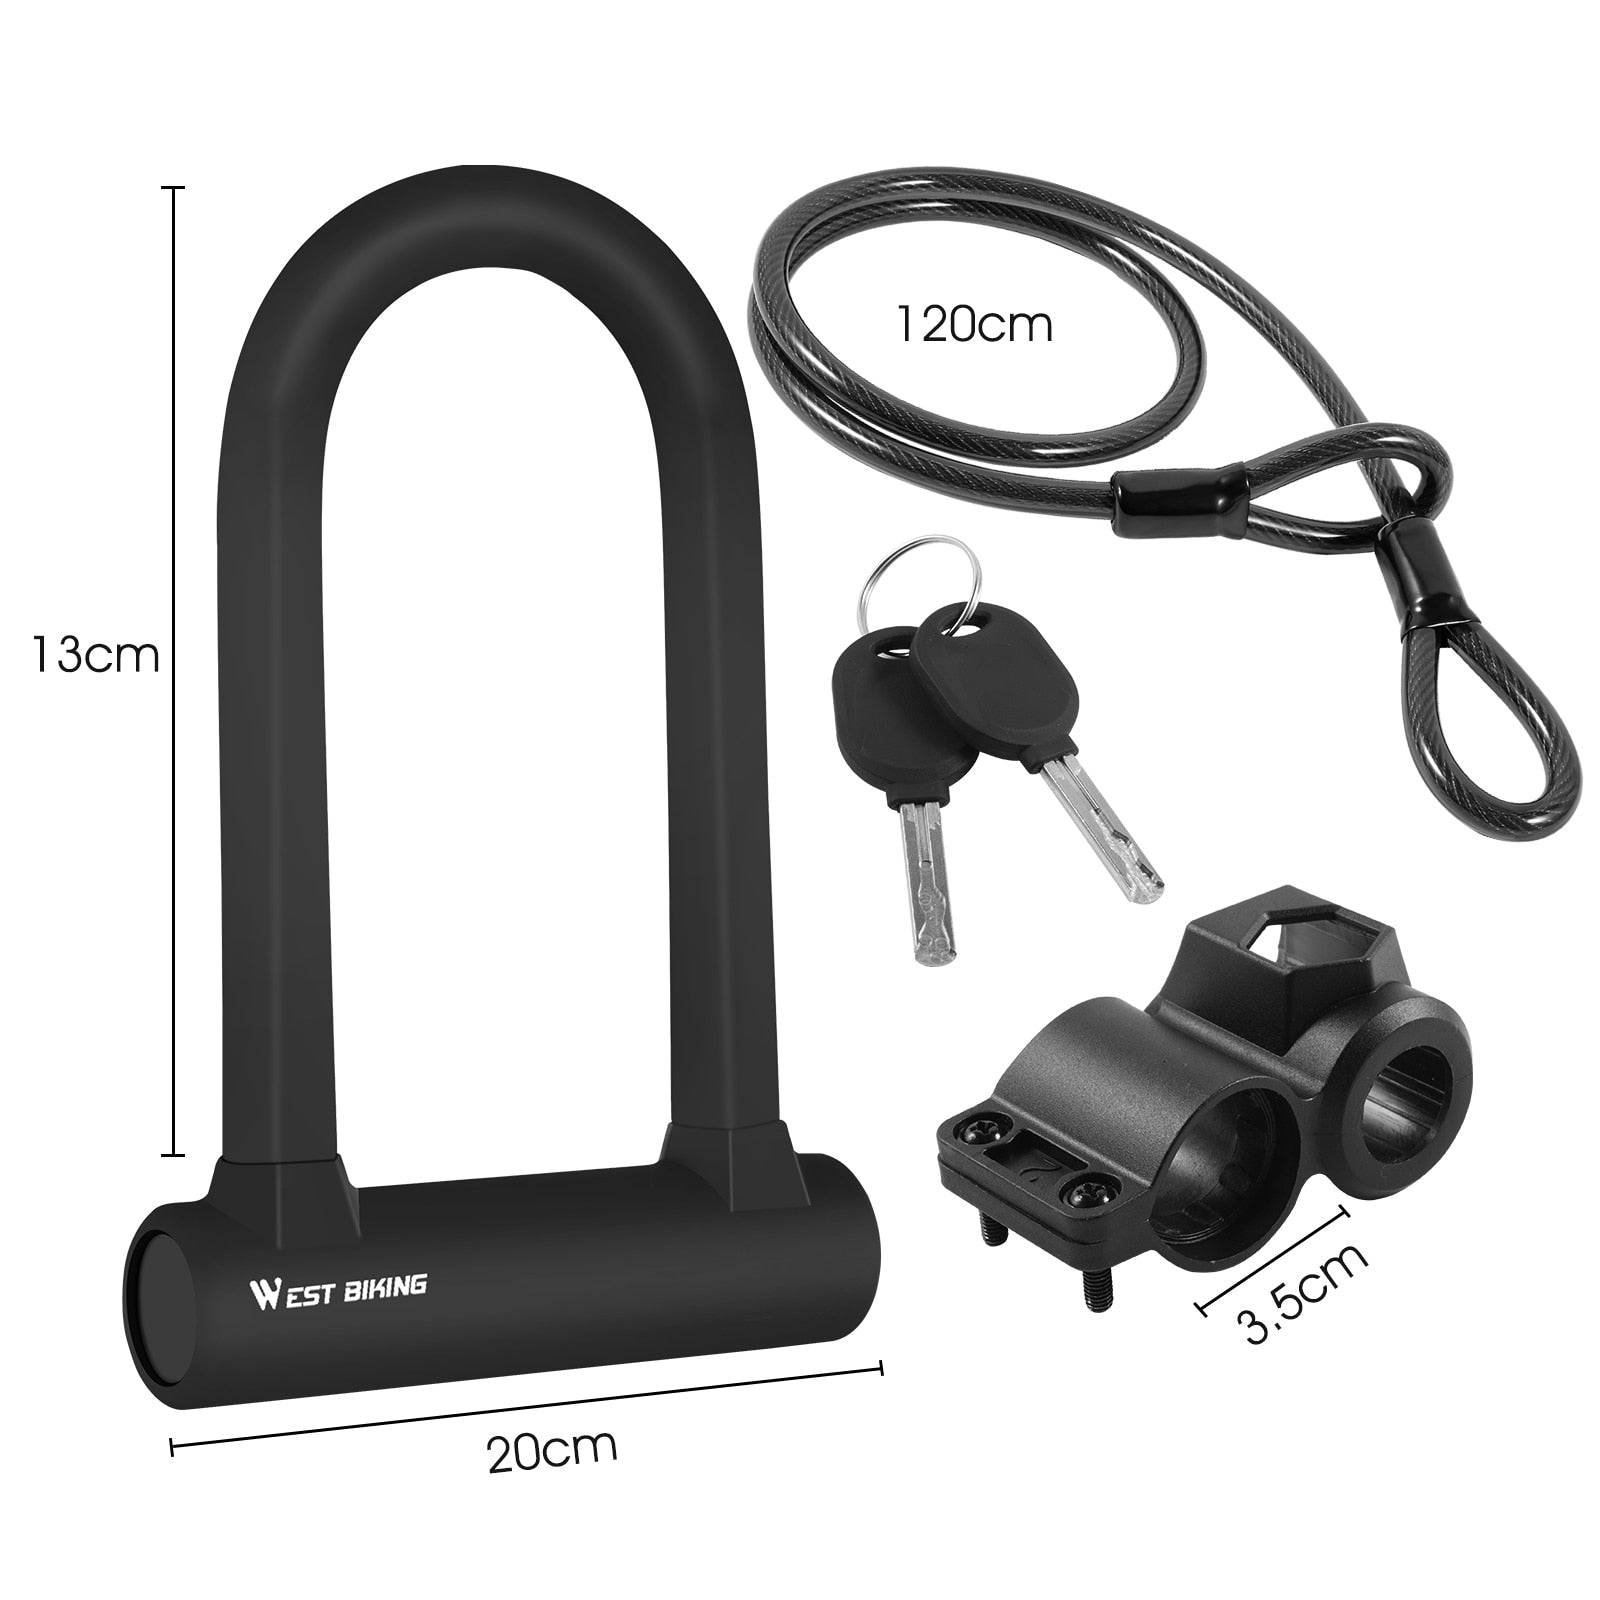 MTB Road Bicycle Lock Anti-theft Bike Cable U Lock With 2 Keys Motorcycle Scooter Security Cycling Accessories